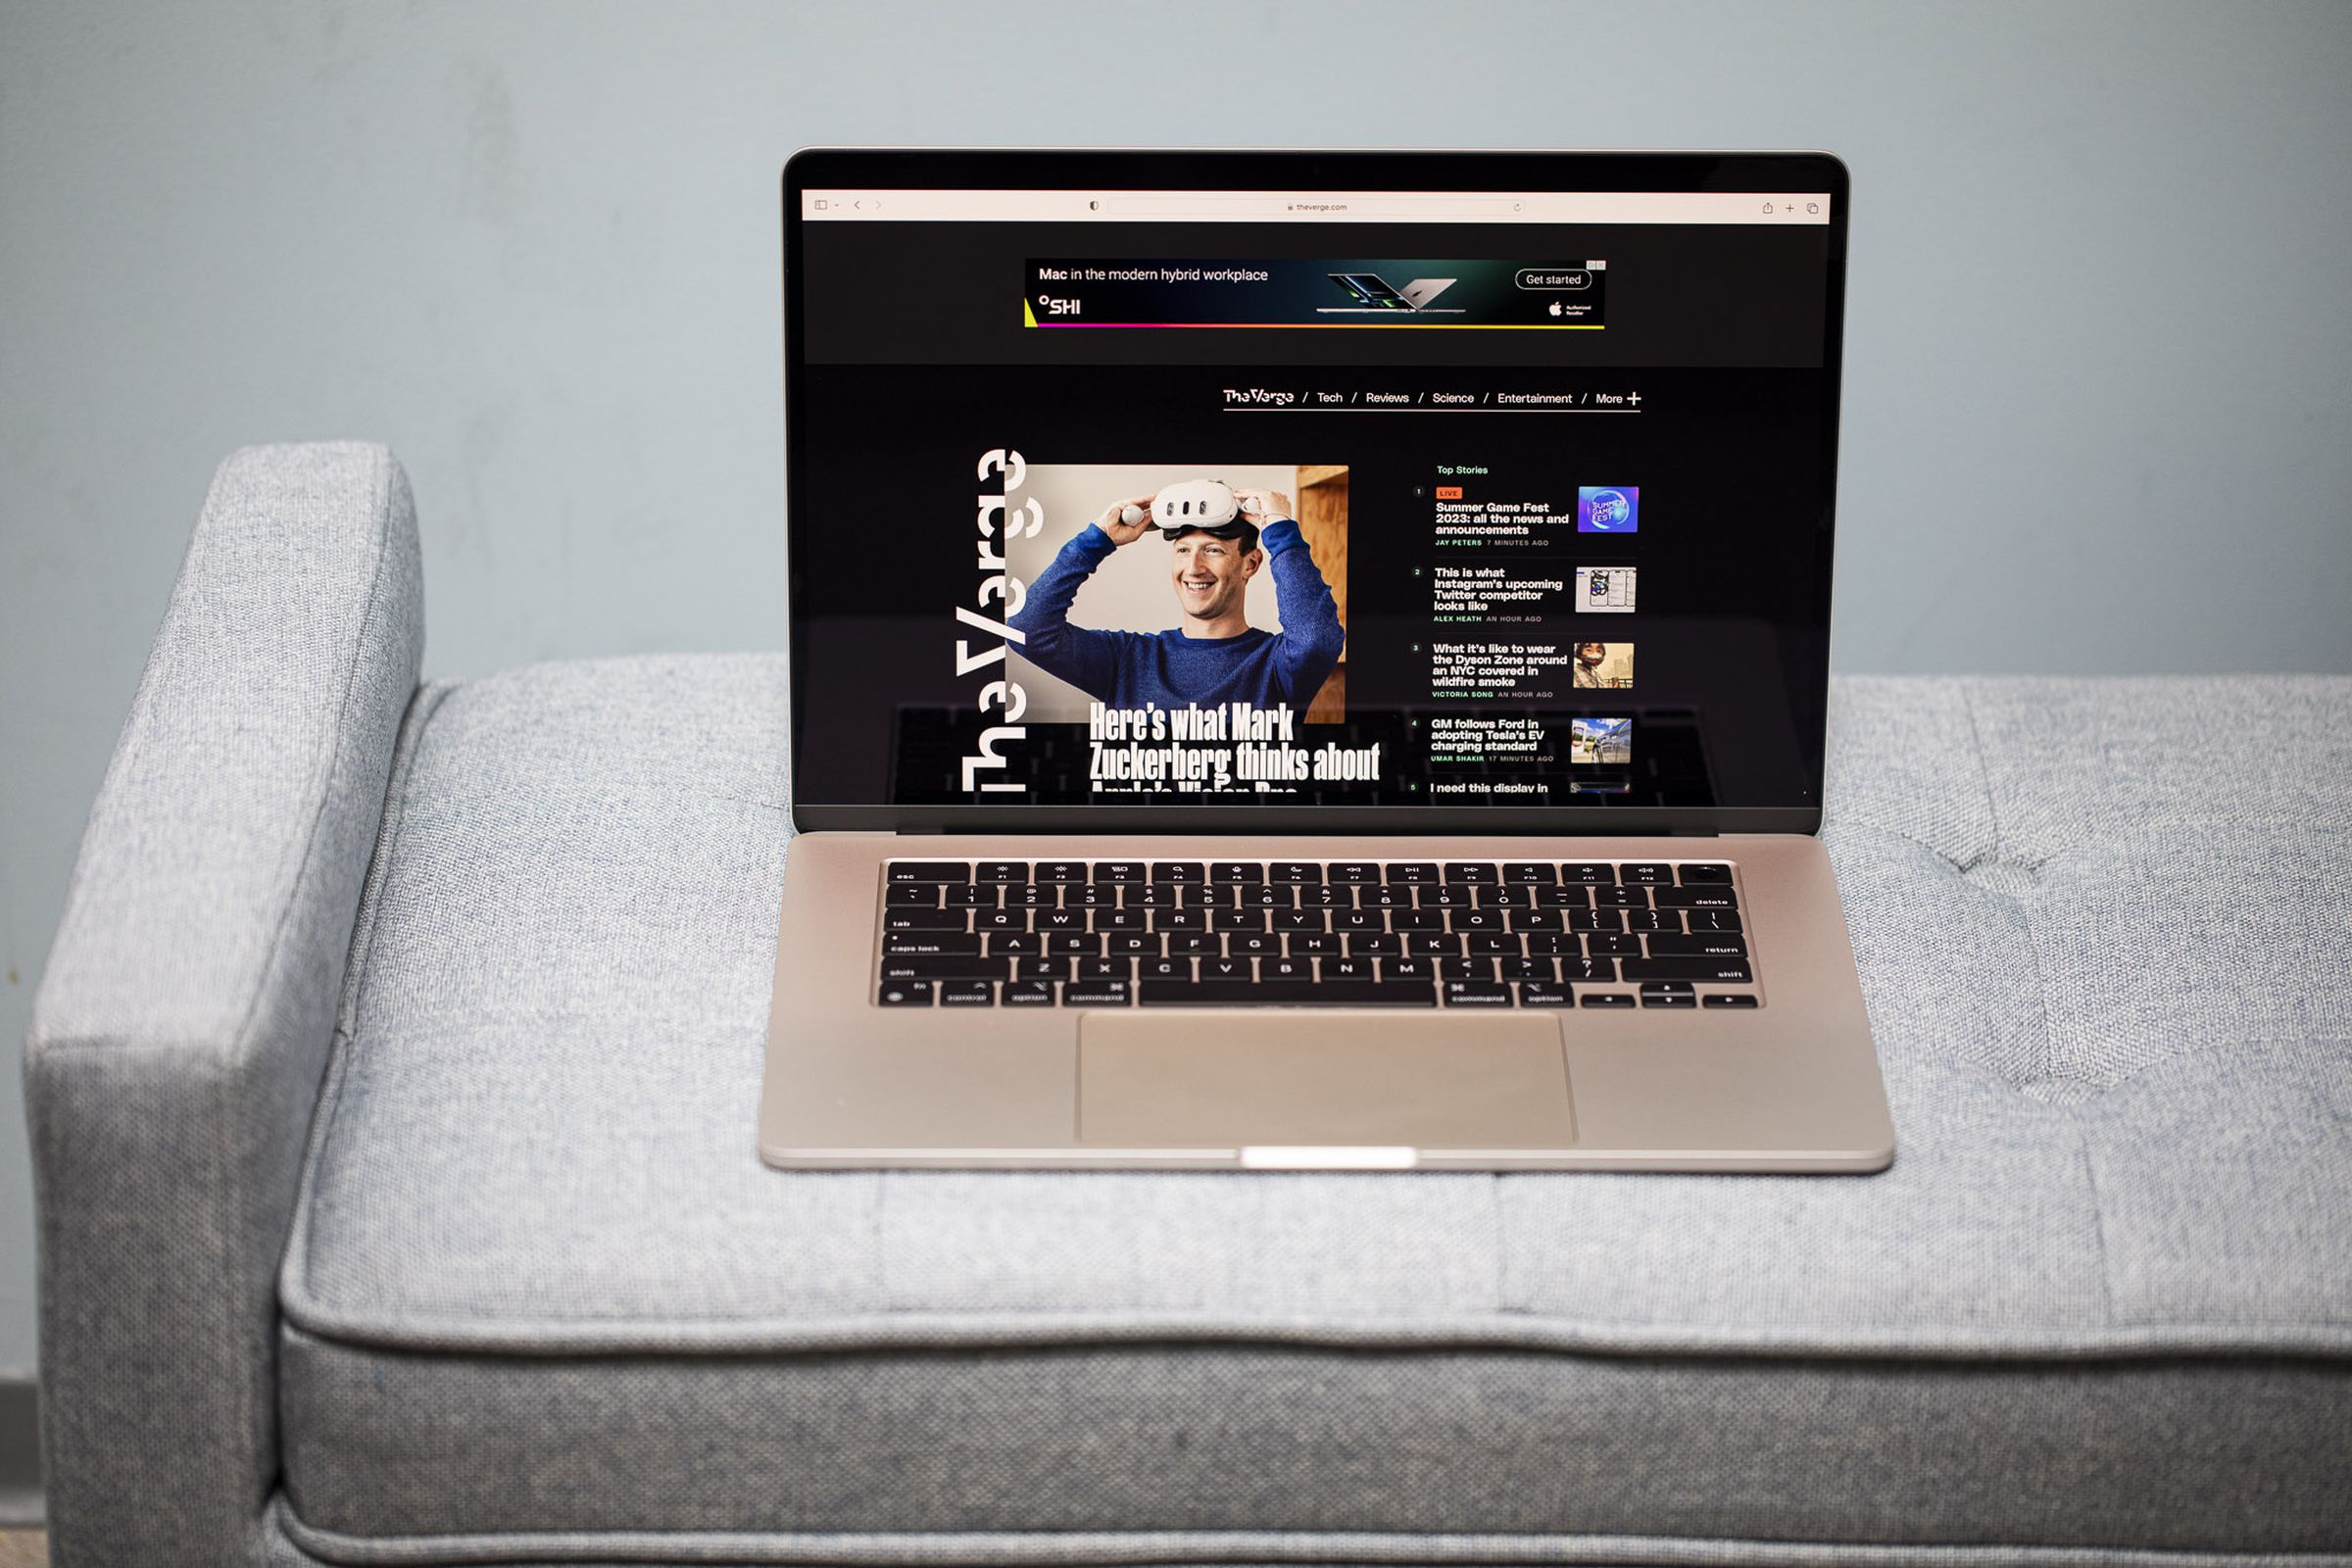 A 15-inch MacBook Air open on a gray couch.